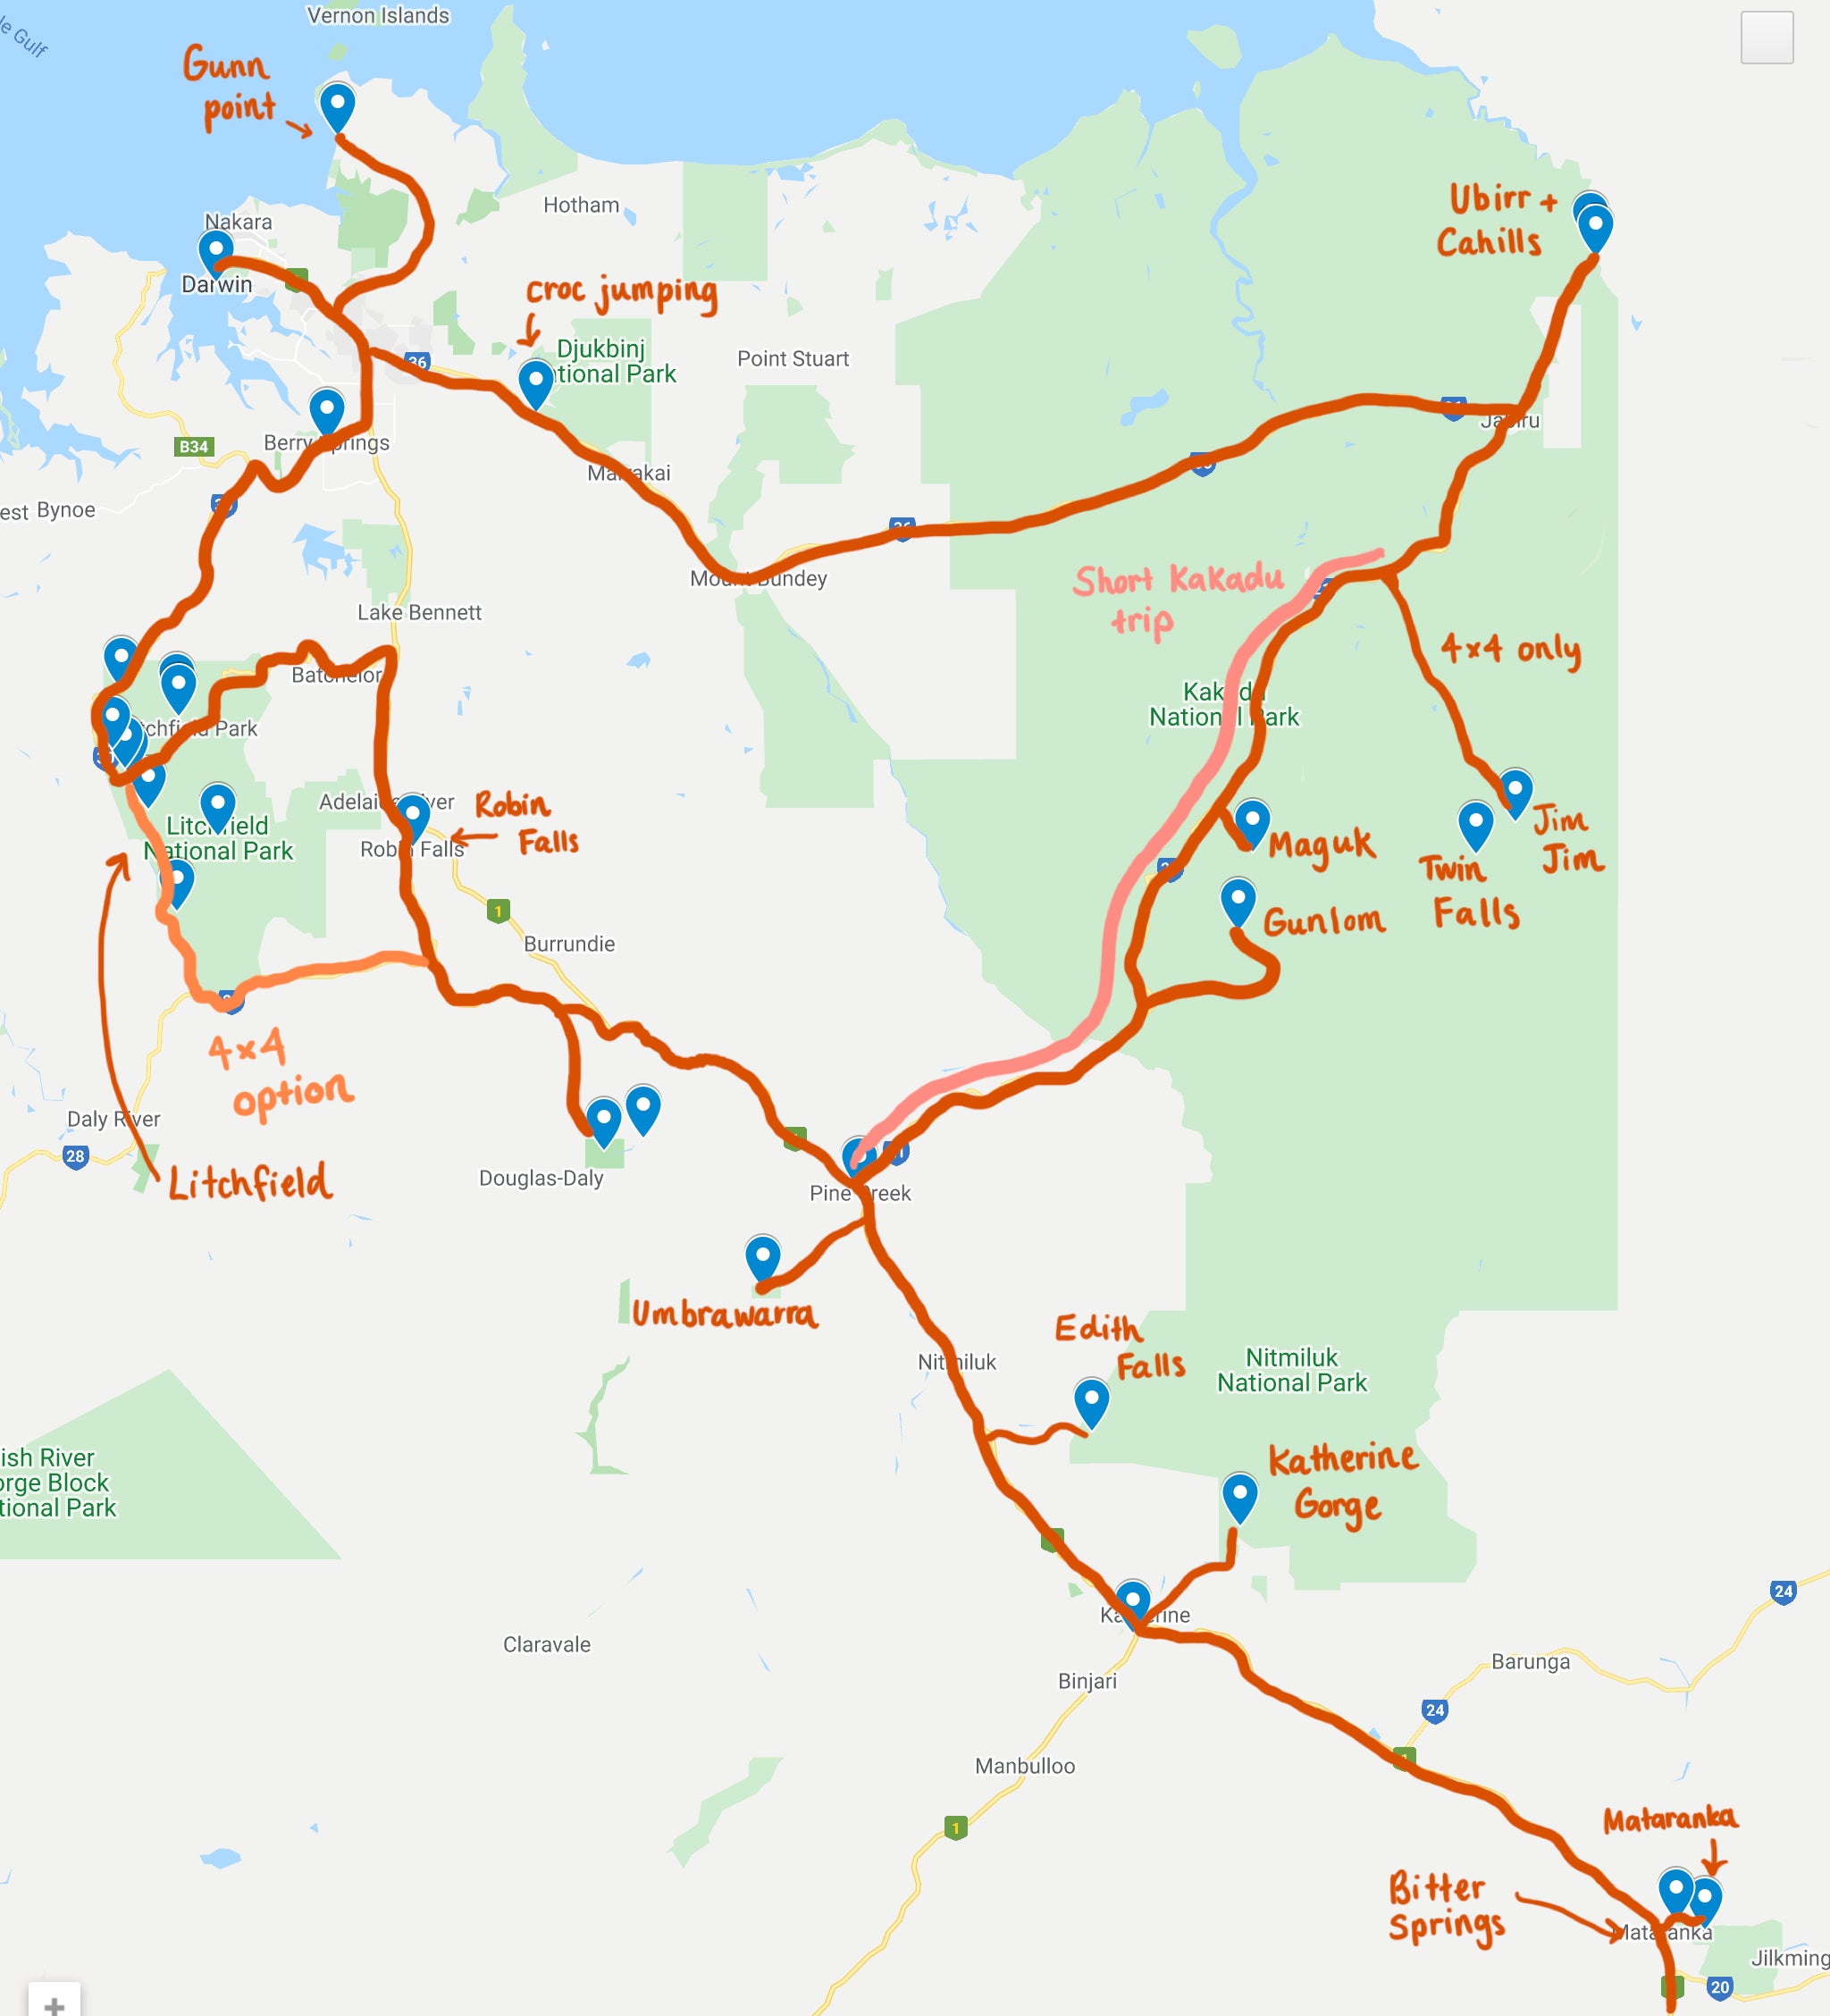 northern territory map, road trip map, northern territory road trip, map of australia